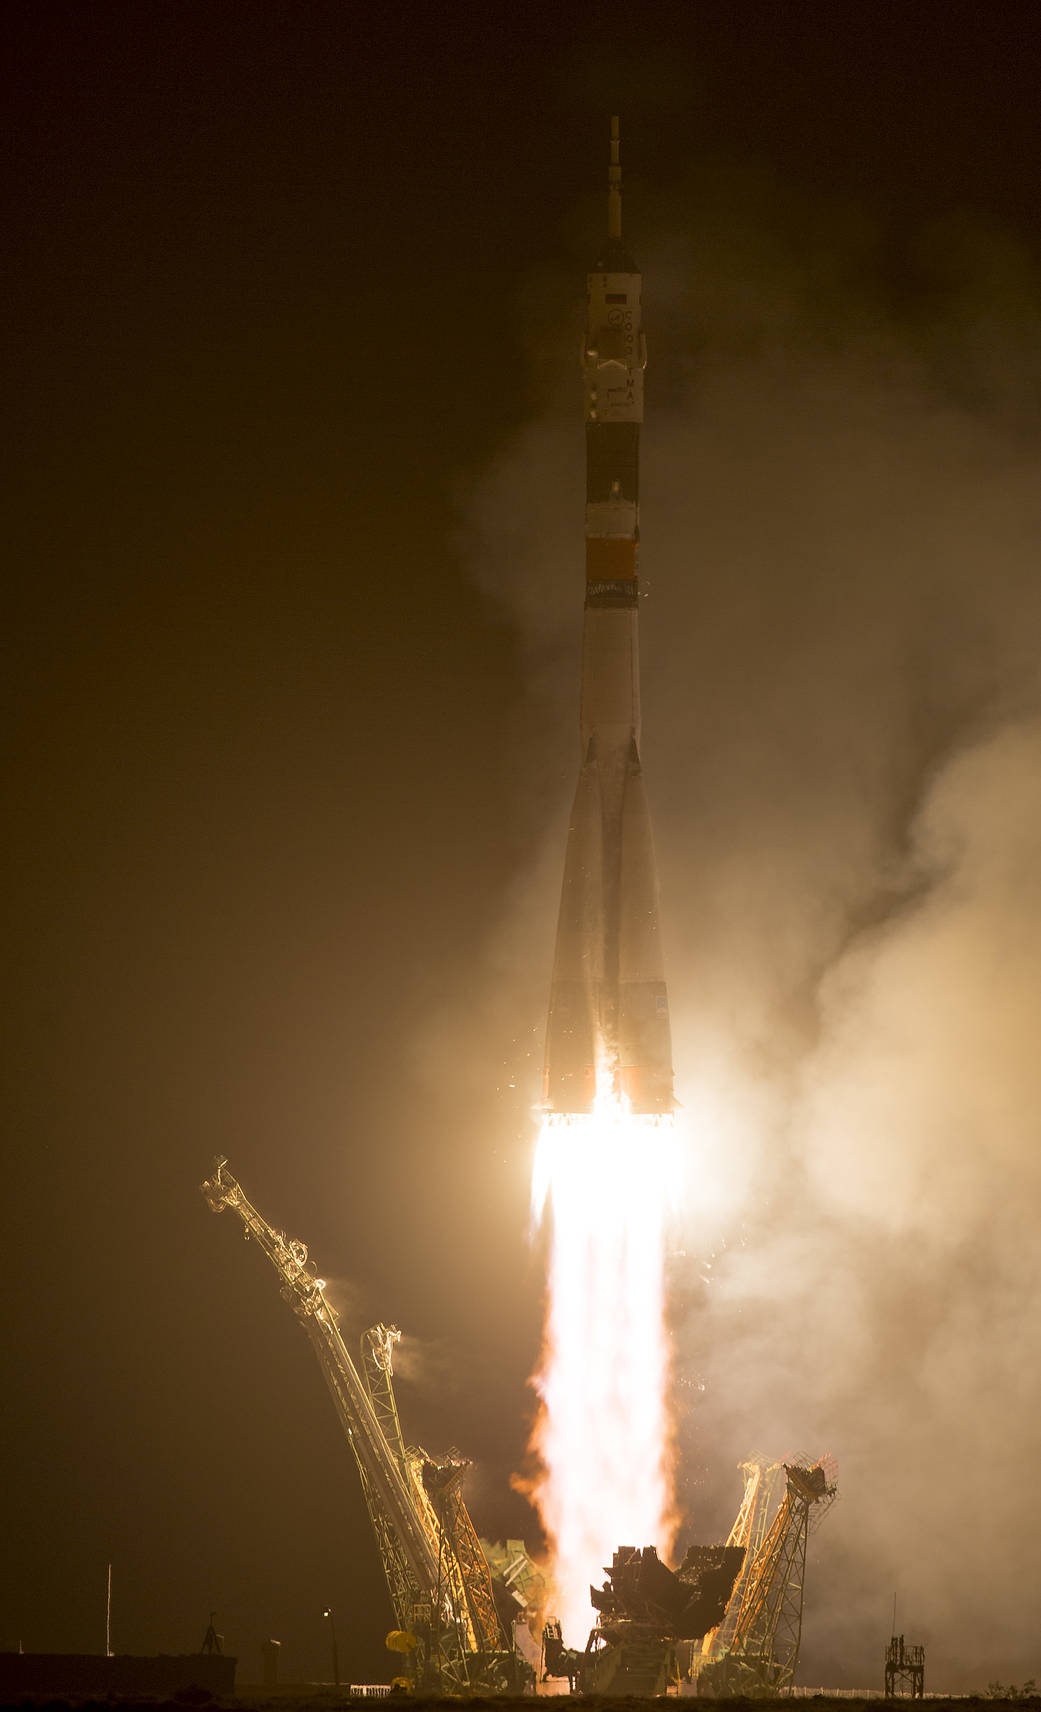 The Soyuz TMA-13M rocket is launched with Expedition 40 Soyuz Commander Maxim Suraev, of the Russian Federal Space Agency, Rosco